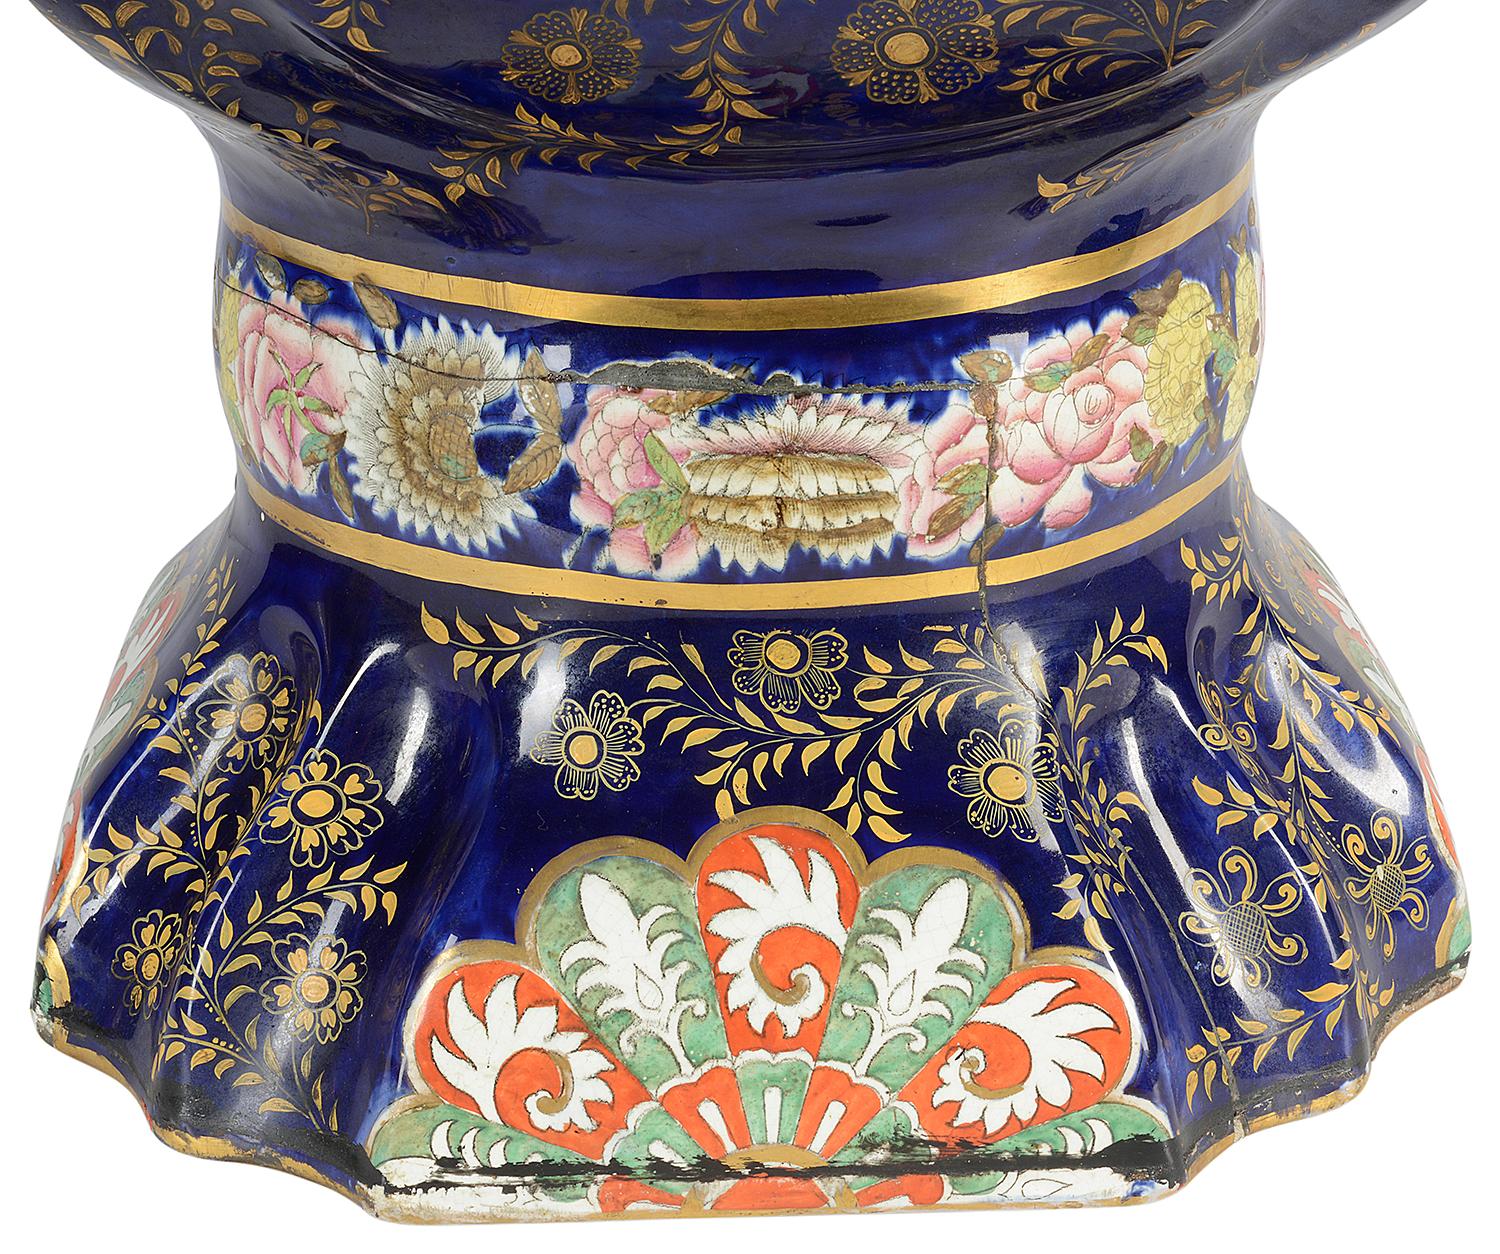 A very impressive large 19th century Masons iron stone pagoda style lidded vase. Having the classic Imari colours if cobalt blue ground and orange highlights. Inset painted panels depicting oriental scenes, mythical cat like gilded handles to either